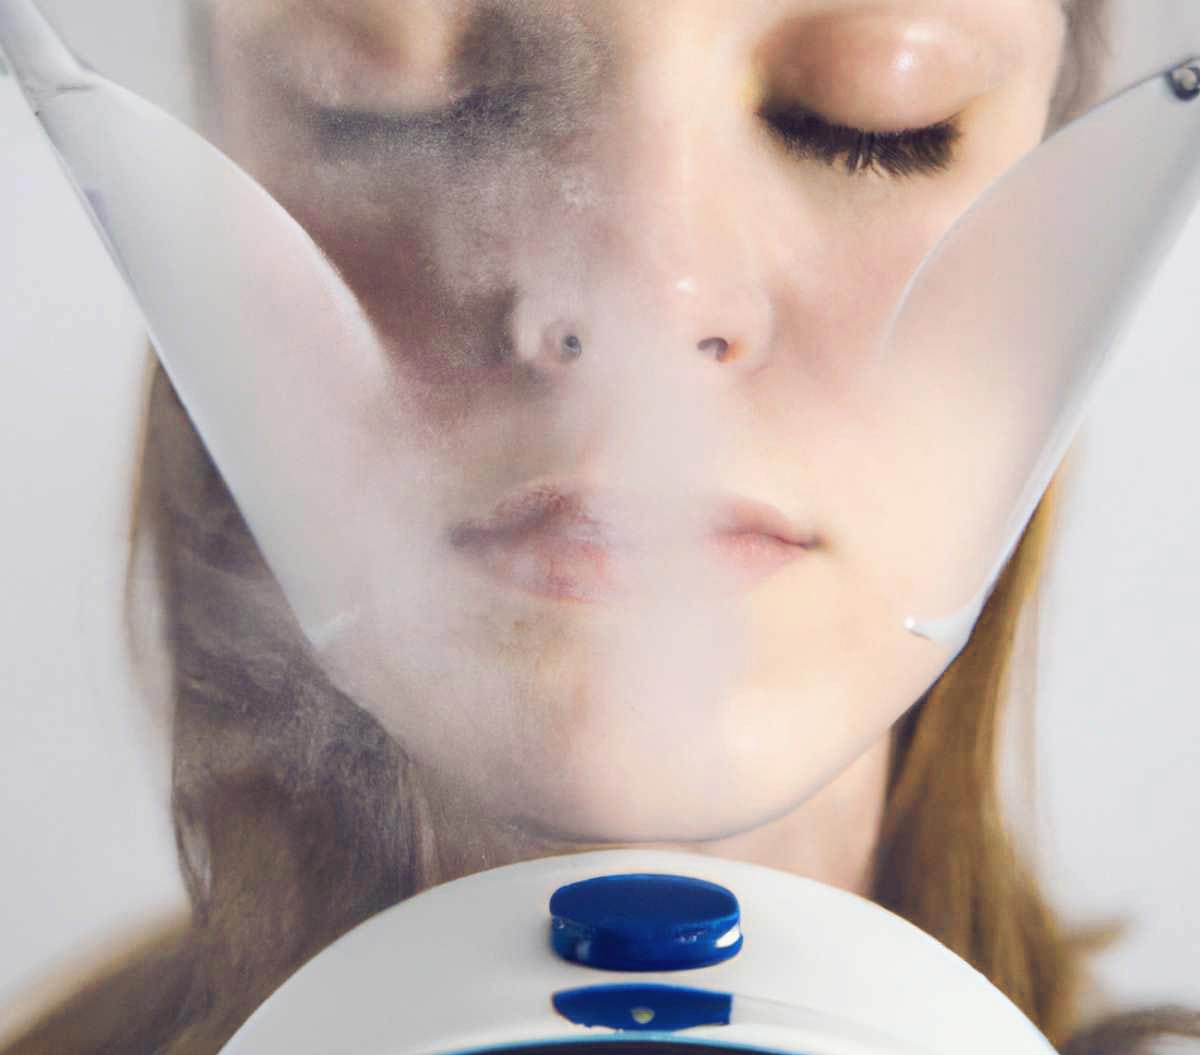 Image showing a person performing steam inhalation procedure.